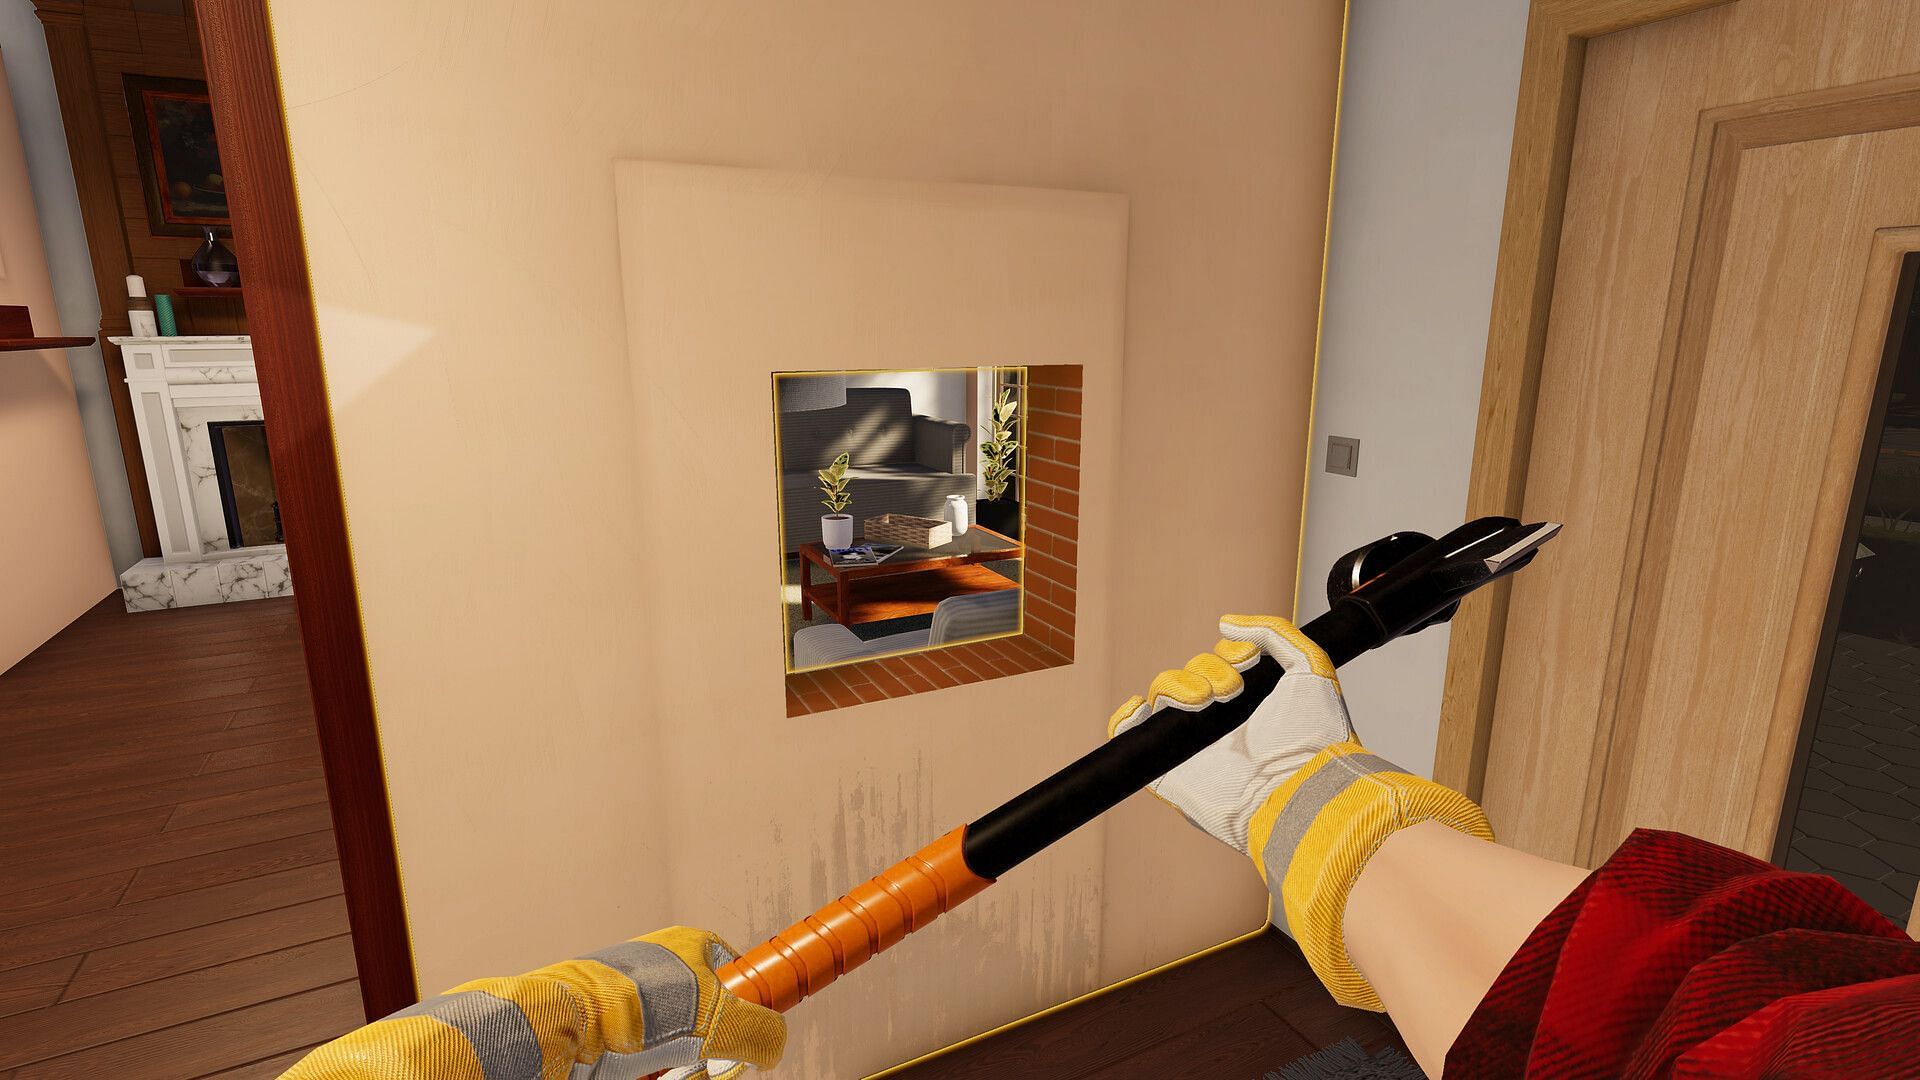 House Flipper 2 release date for consoles.